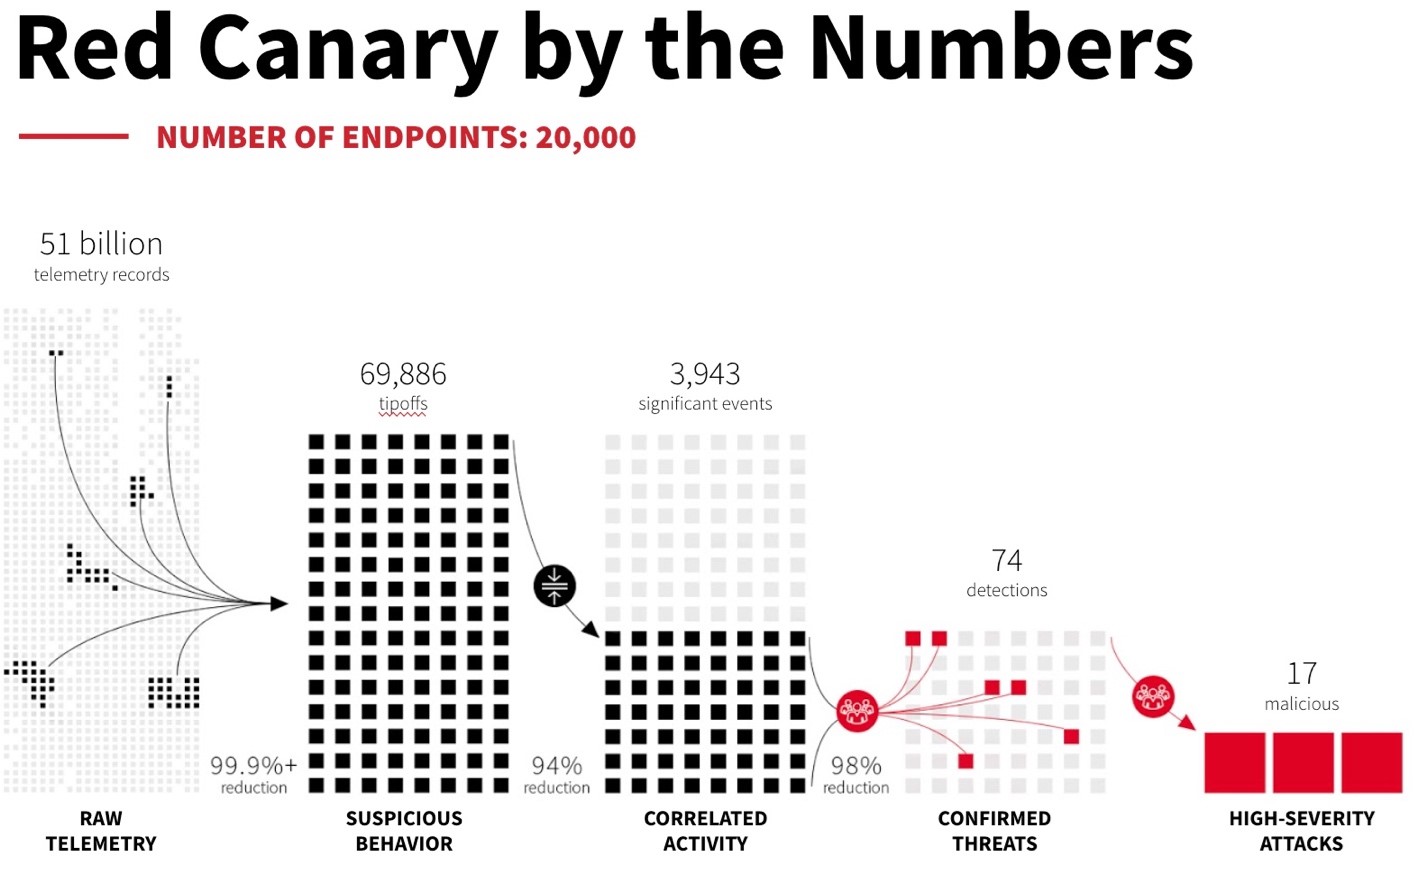 Red Canary by the numbers: 20,000 endpoints, 51 billion telemetry records, 69,886 tipoffs, 3,943 significant events, 74 detections, and 17 high-severity attacks.